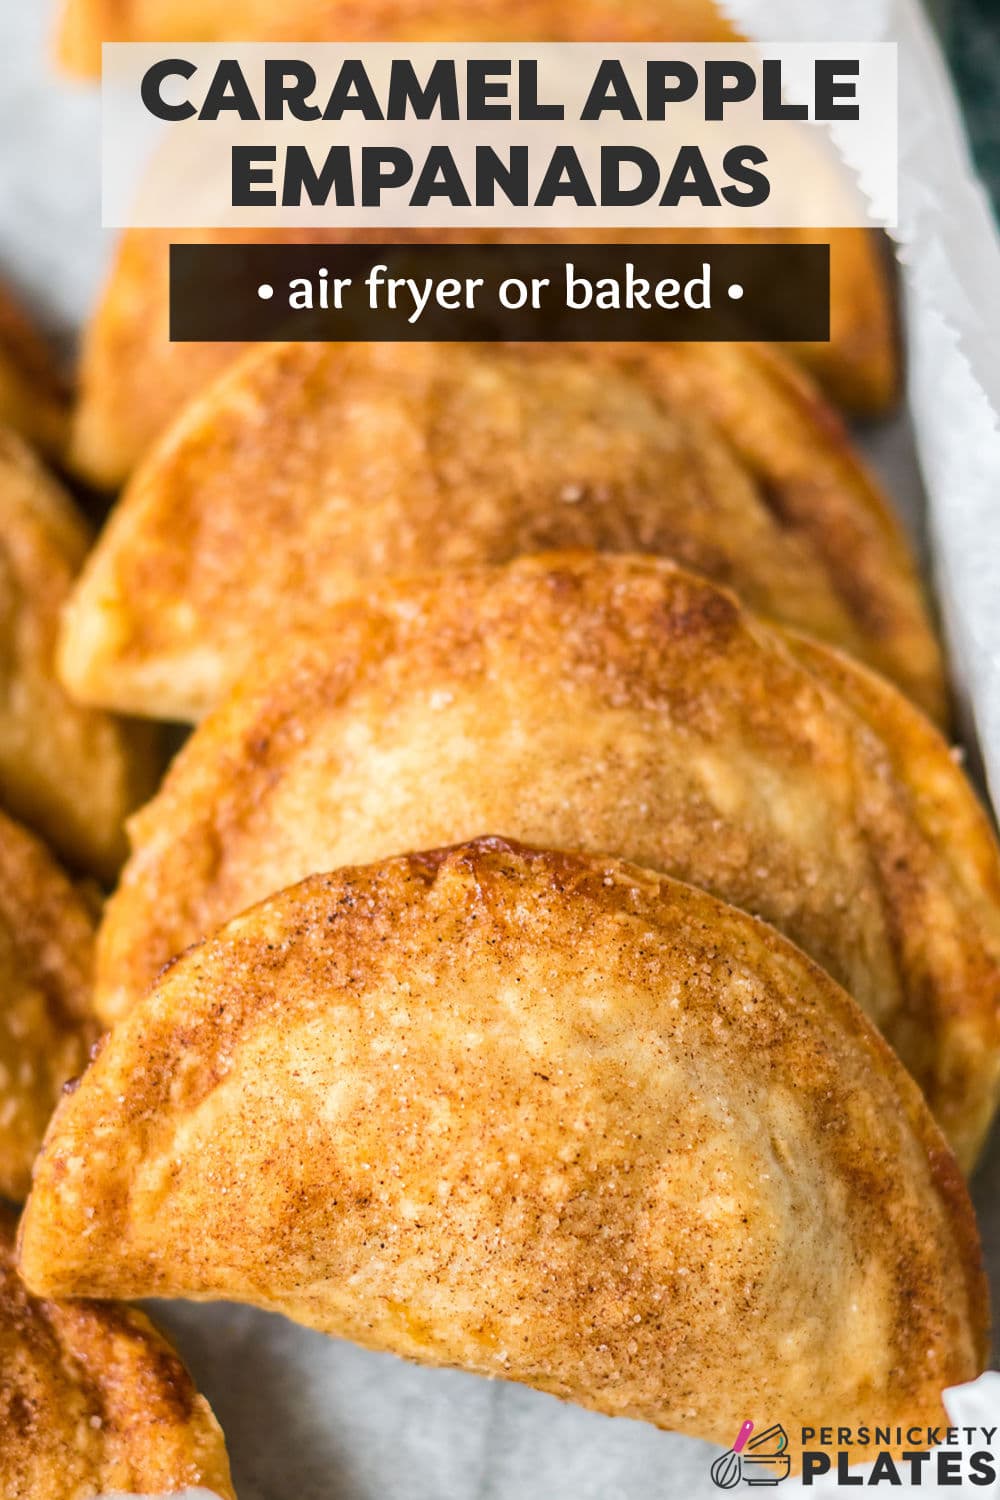 Air Fryer Caramel Apple Empanadas are a throwback Taco Bell copycat made even better! Store-bought crust with an apple pie filling and melted caramel candies comes together quickly, then air fried (or baked) until golden on the outside and thick and syrupy on the inside. Topped with cinnamon sugar, these easy 30-minute dessert empanadas are the best! | www.persnicketyplates.com